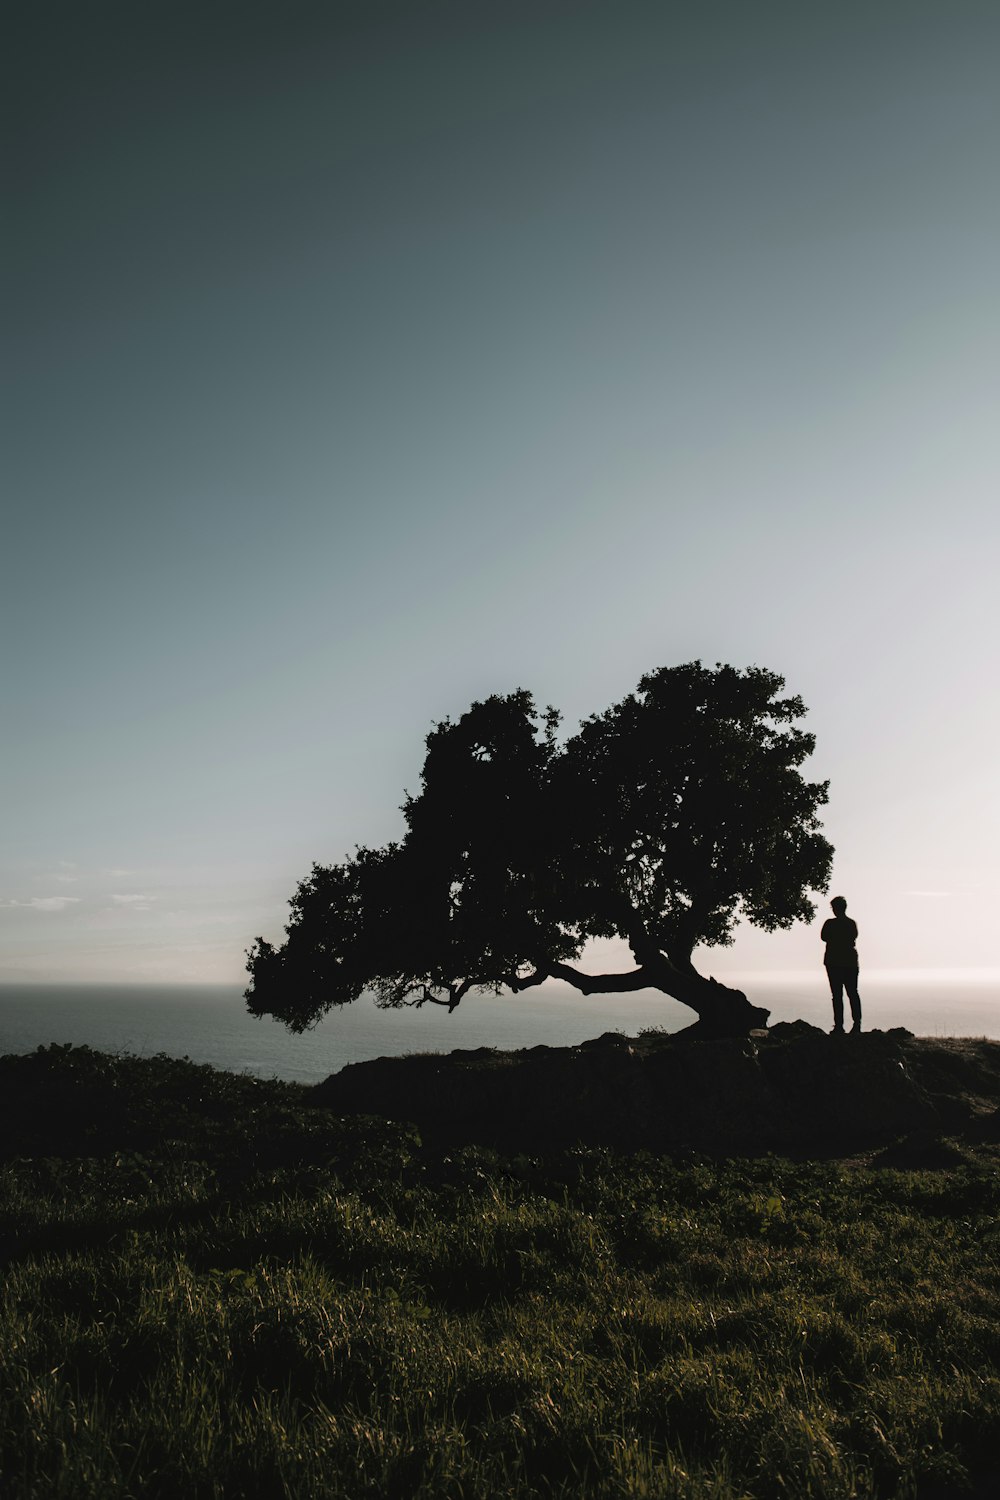 silhouette of 2 person standing on rock formation near tree during daytime